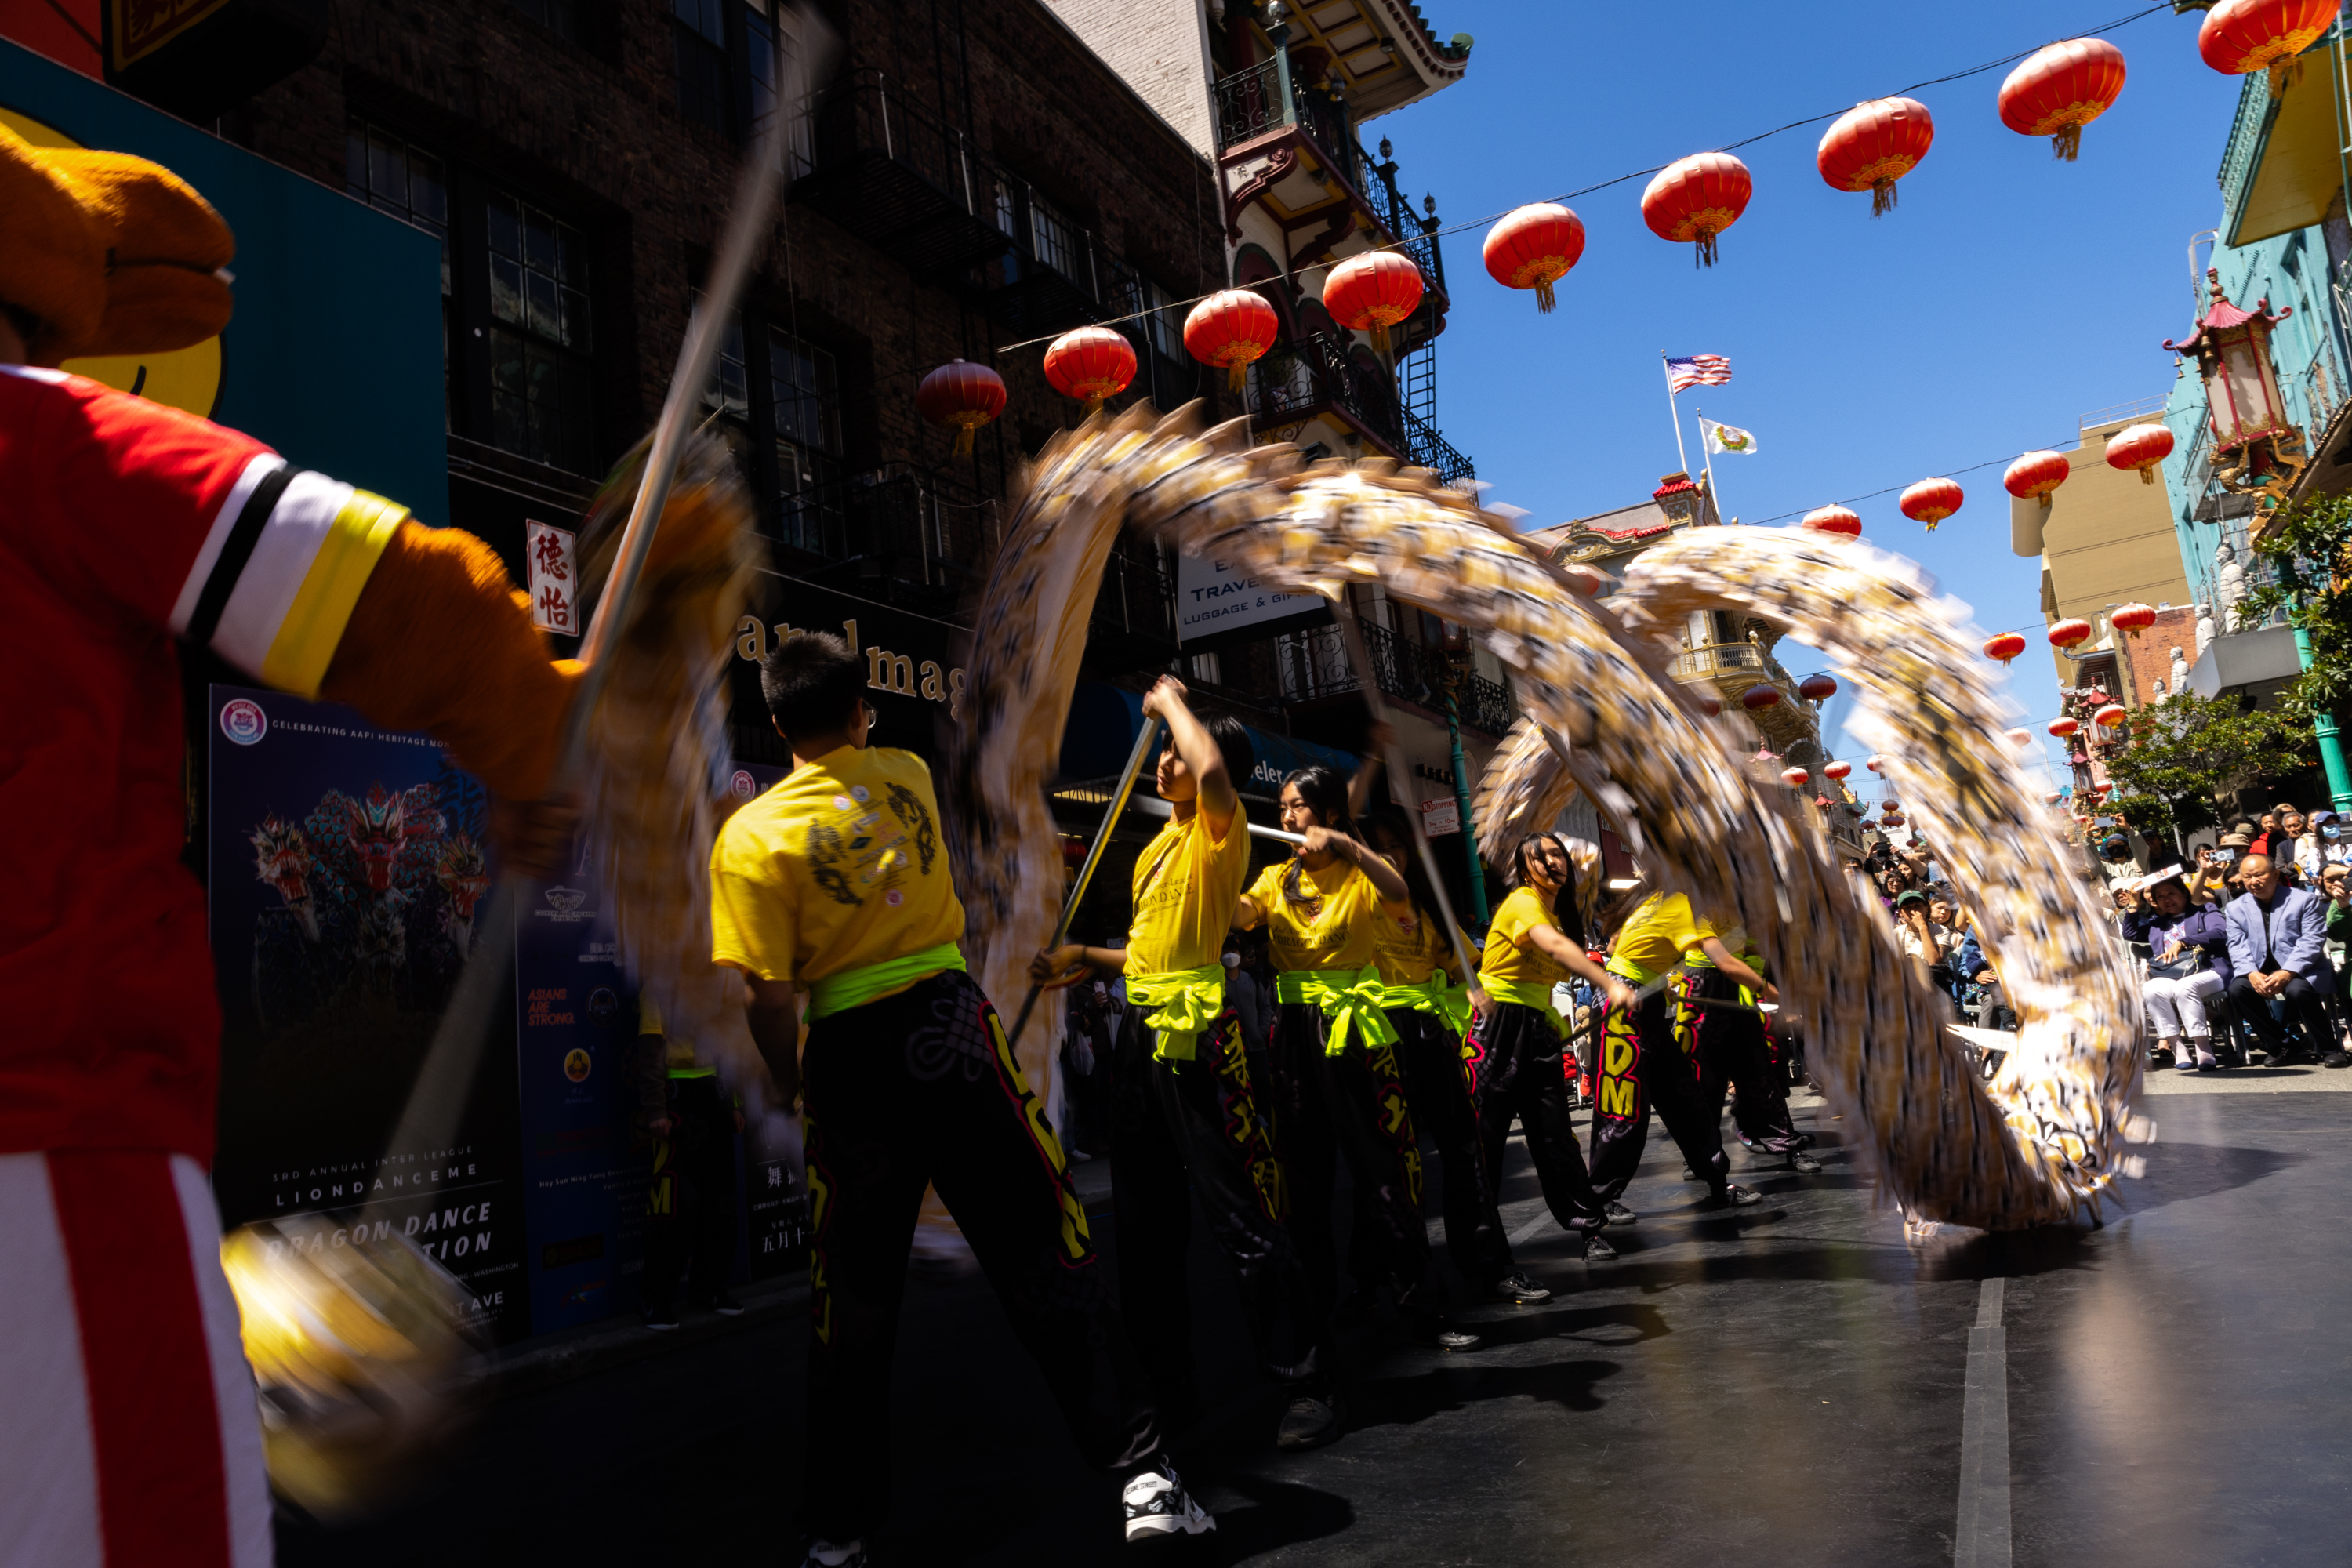 A dynamic street parade with performers in yellow dancing with long, flowing dragon costumes under red lanterns.